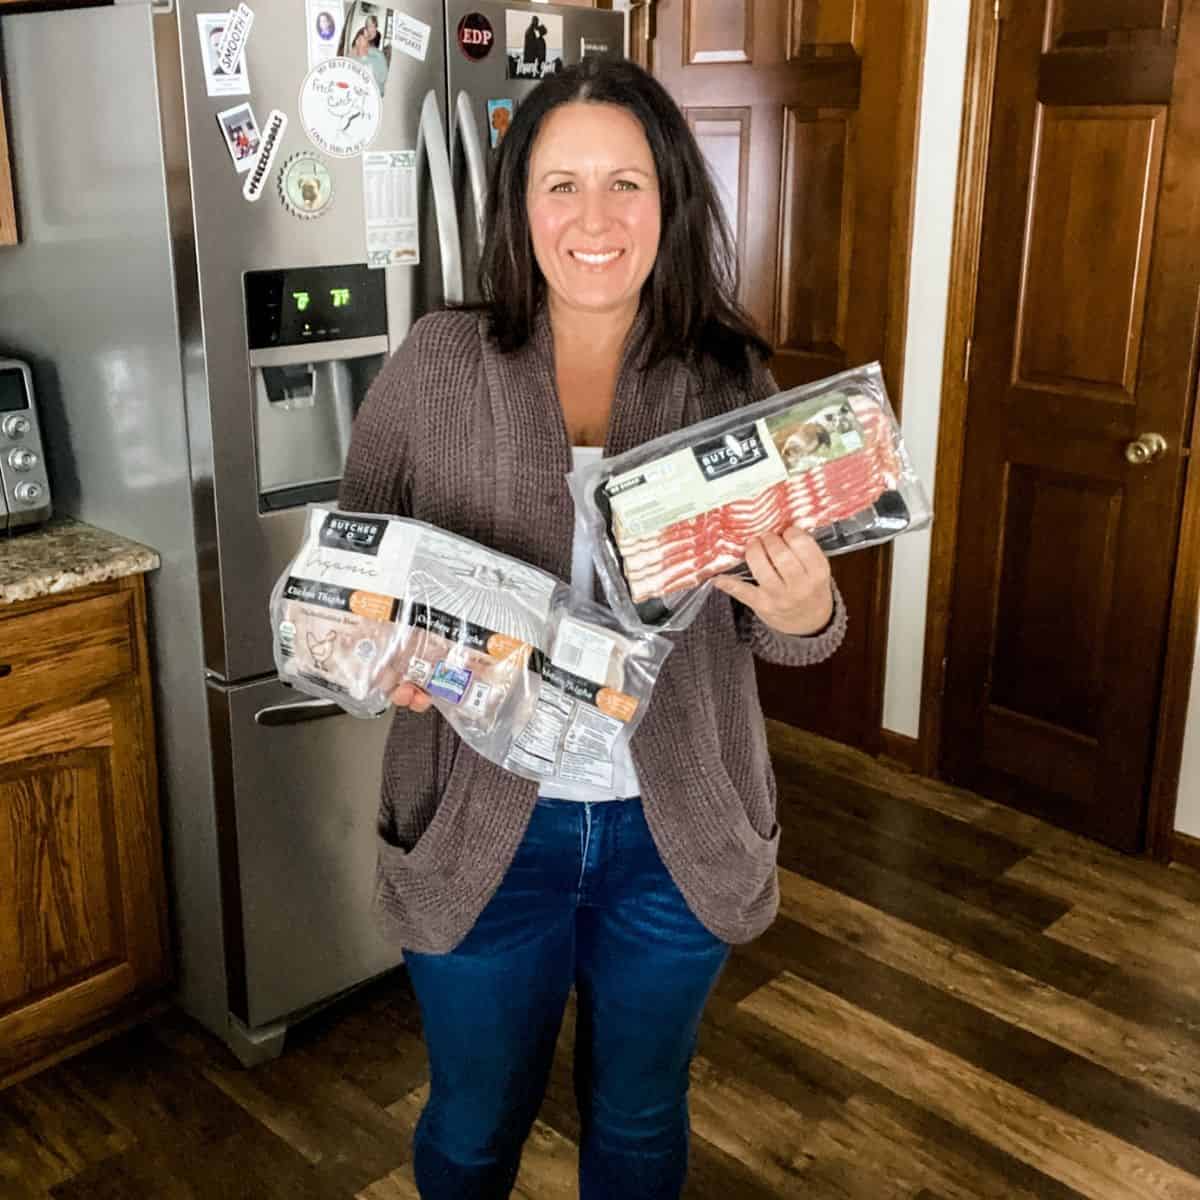 Tammy Overhoff holding a package of Butcherbox chicken things and Butcher Box box for her Butcher Box Review